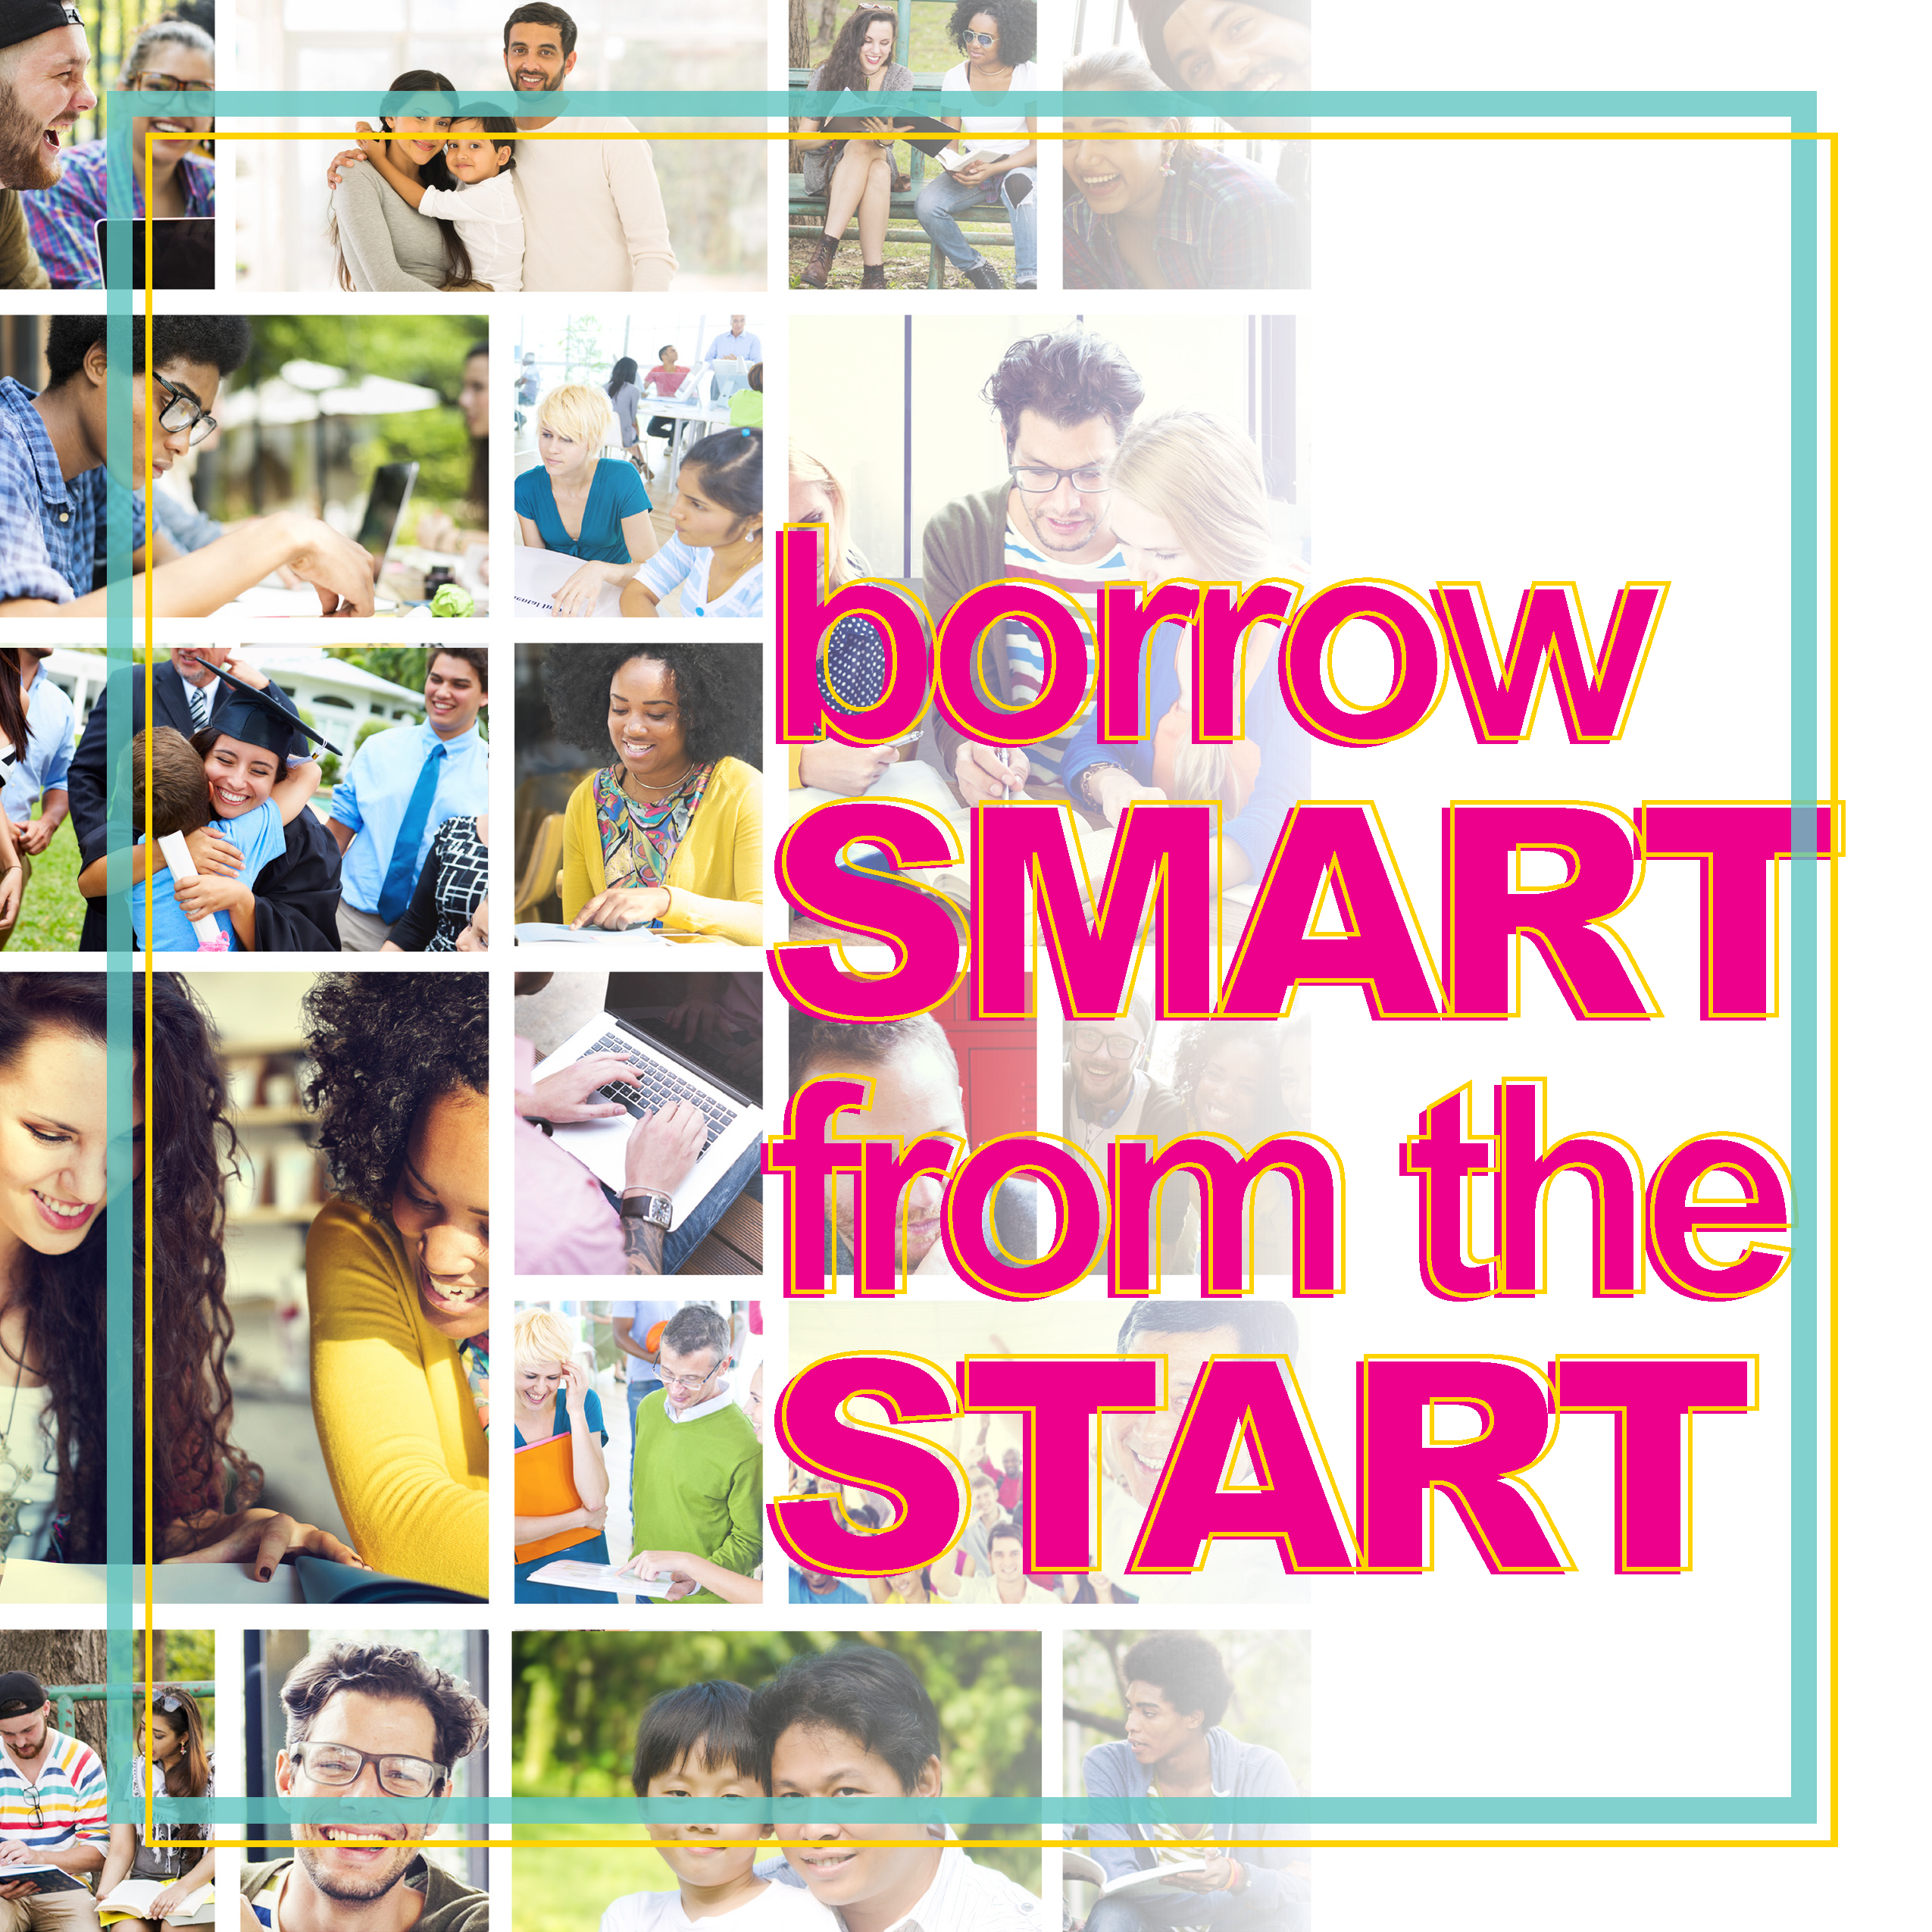 PDF of Borrow Smart From the Start Brochure opens in a new tab